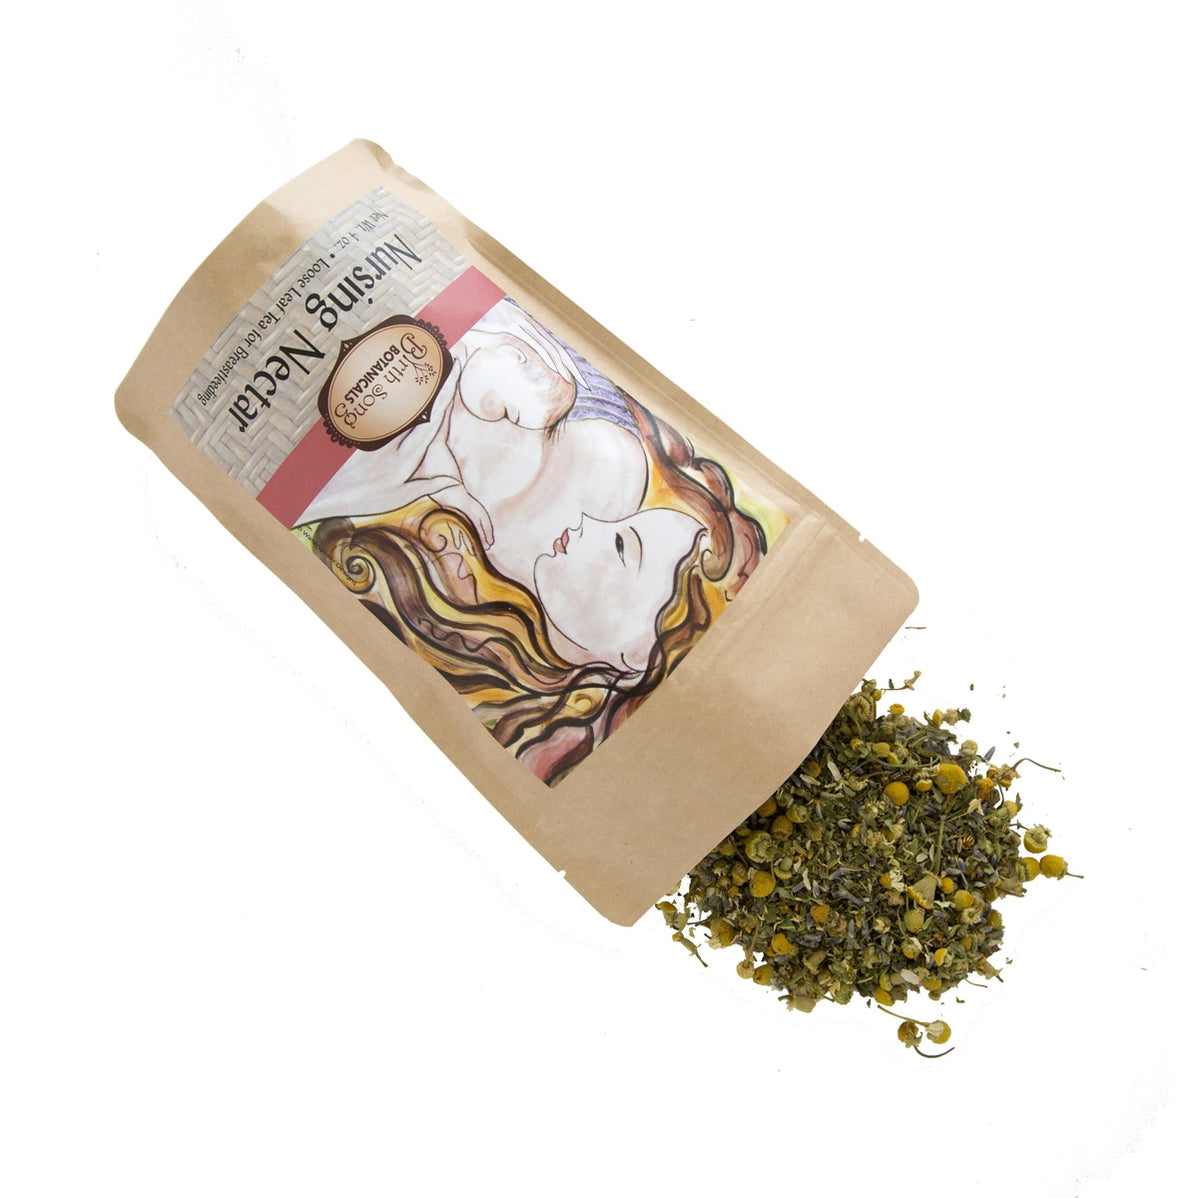 Herbal T Set For Pregnancy Breastfeeding And Postpartum Birth Song Botanicals Co 2102